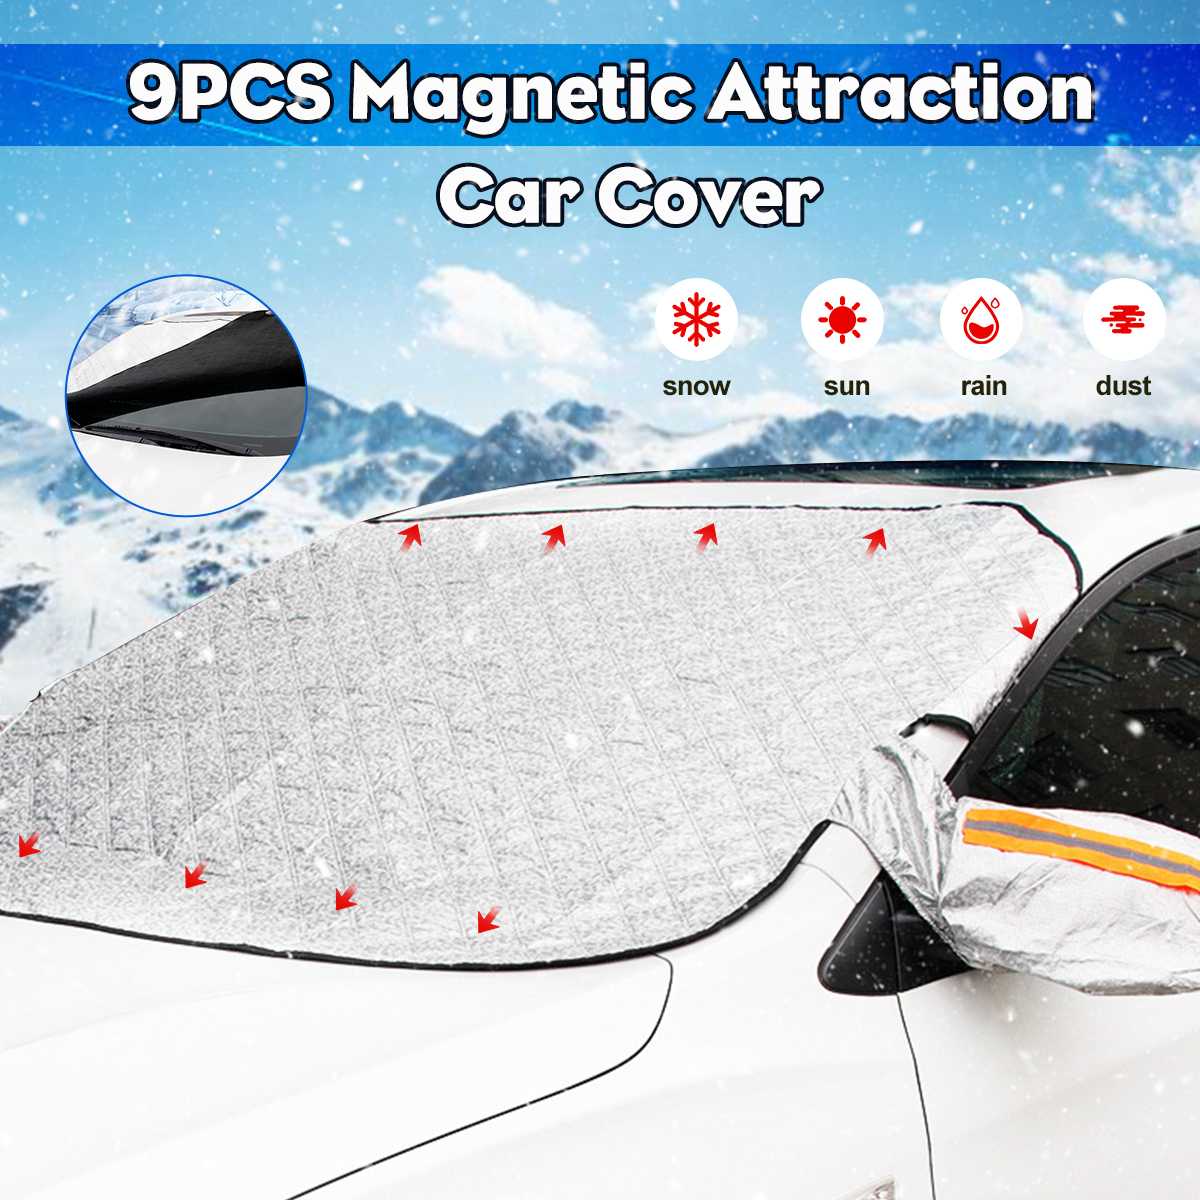 Magnets Universal Car Windshield Mirror Reflective Bar Cover 5 Layers Thicken Sun Shade Protector Winter Snow Ice Rain Dust